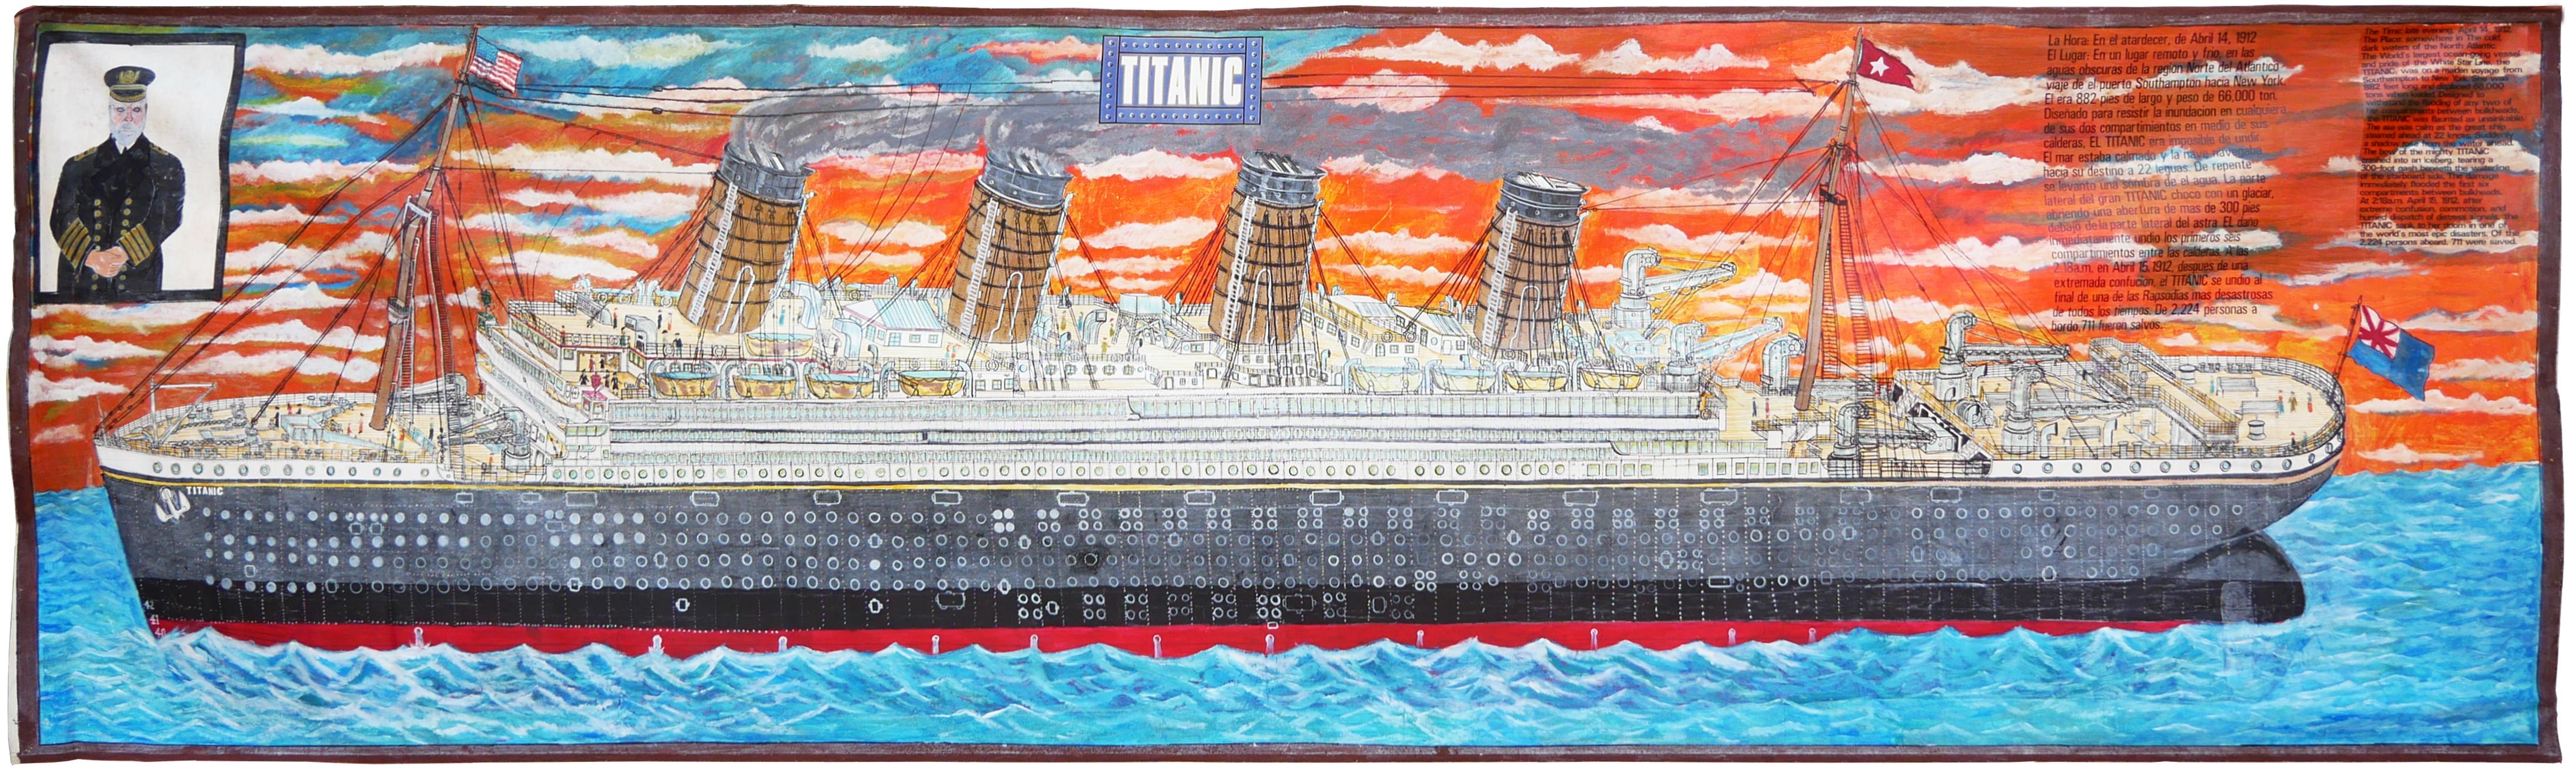 Orange & Blue-Toned Abstract Contemporary Painting of the Titanic